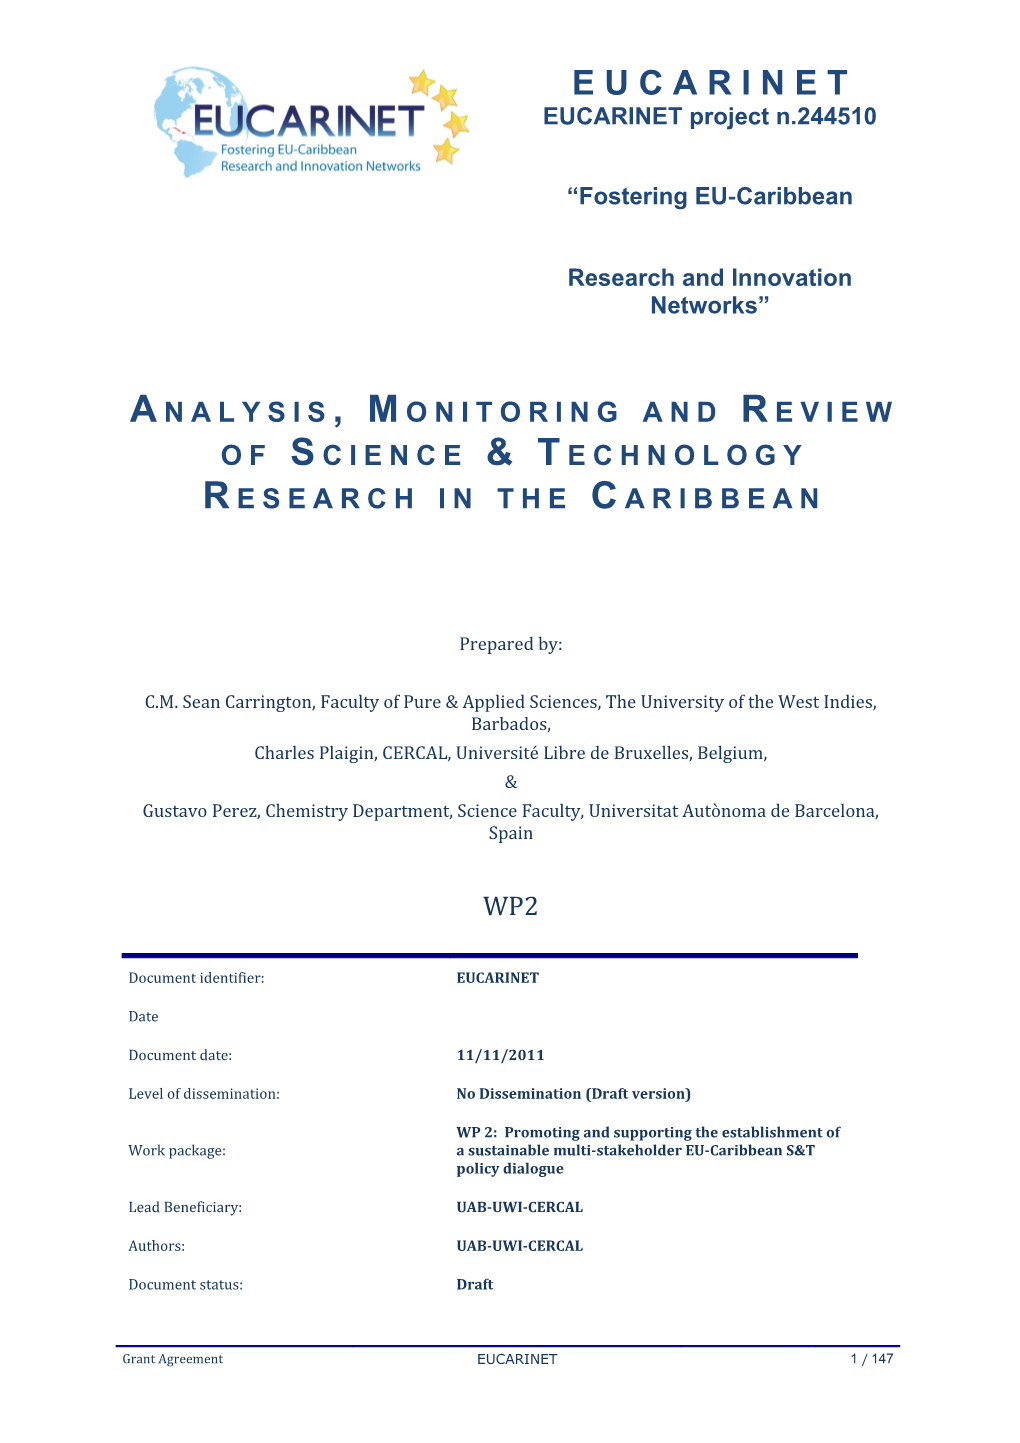 Analysis, Monitoring and Review of Science & Technology Research in the Caribbean